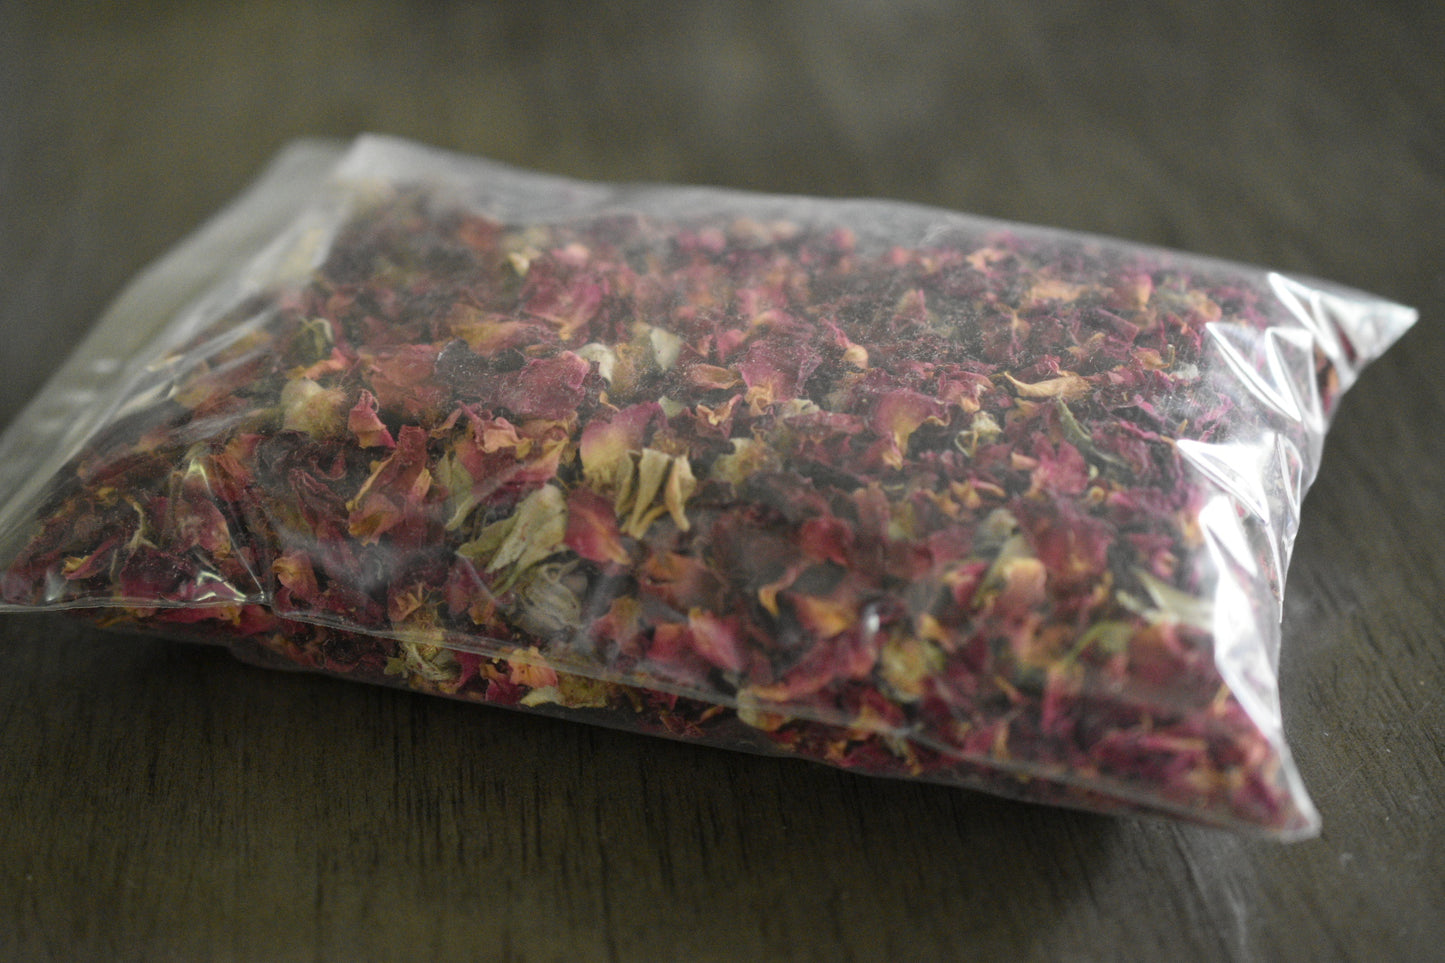 A plastic bag filled with rose petals and buds rests on a wooden surface to show the packaged product. The rose is a deep pink and red color.